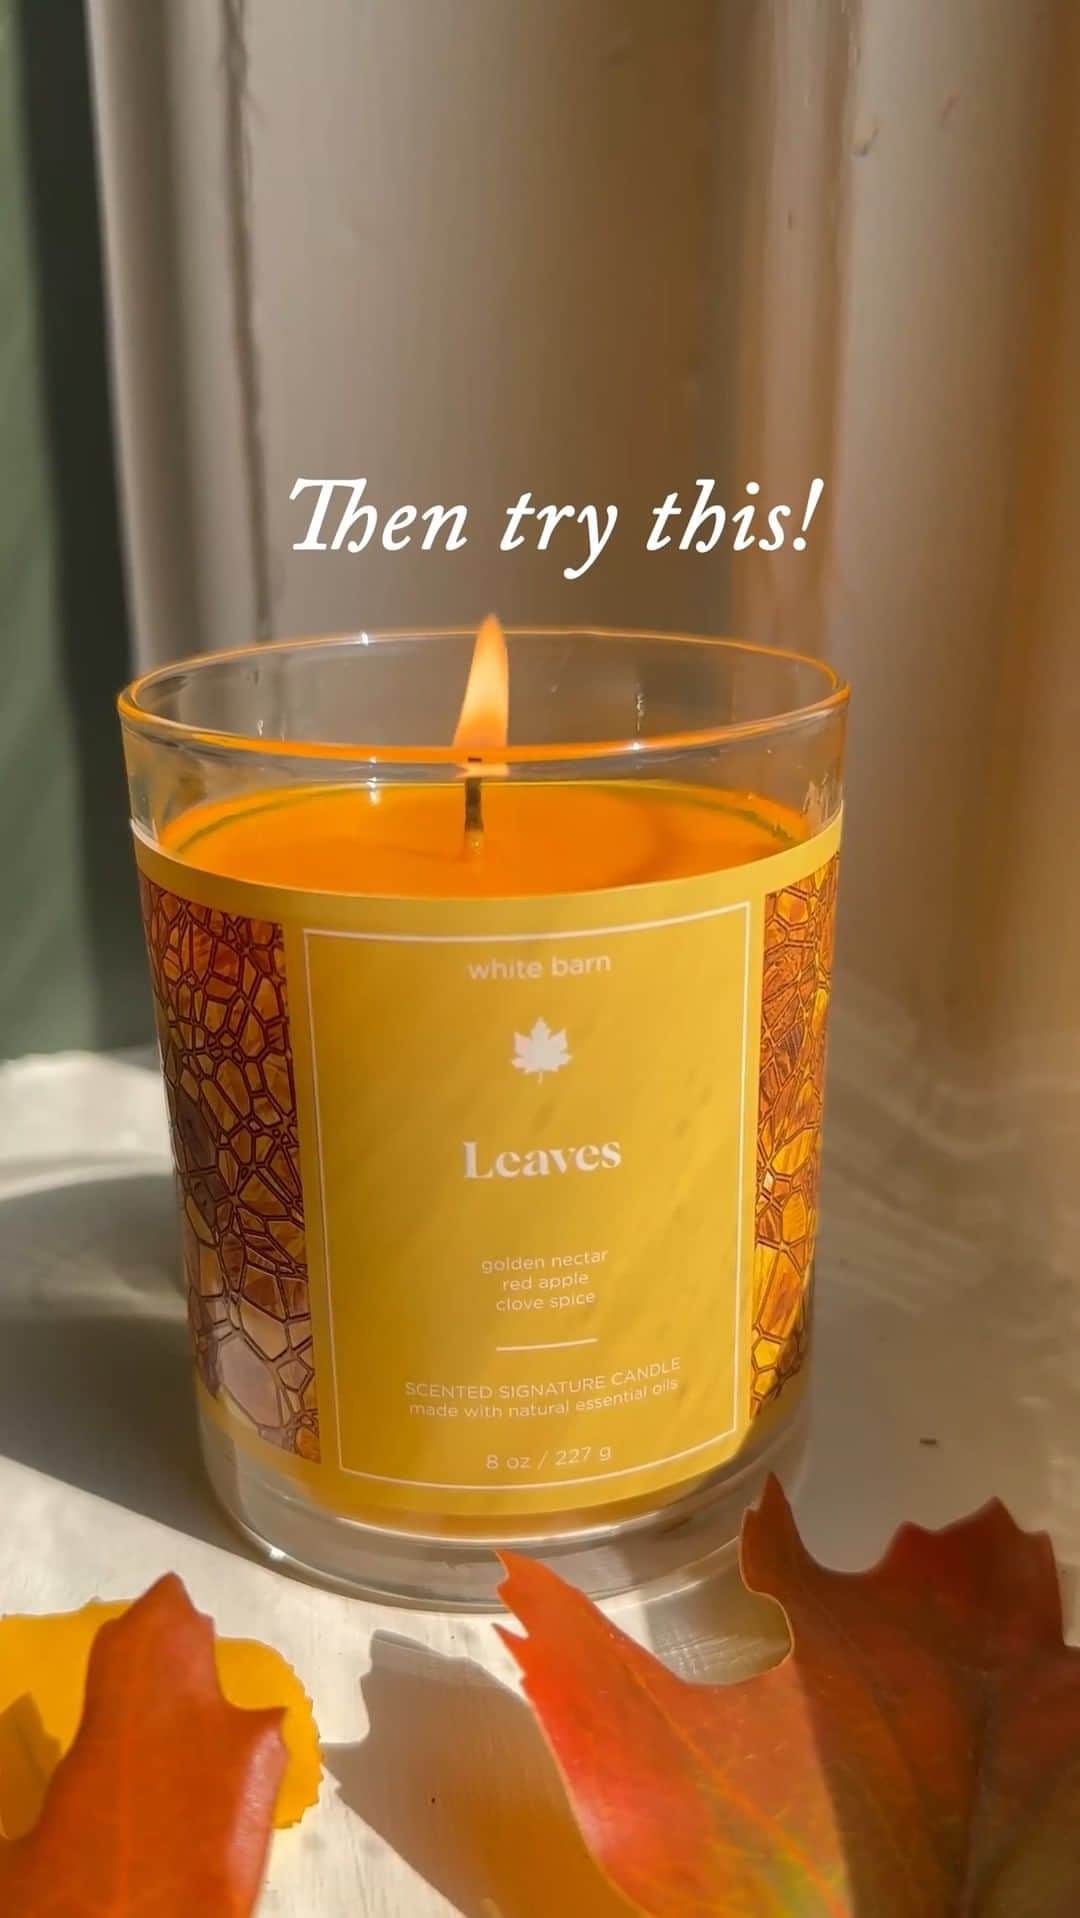 Bath & Body Worksのインスタグラム：「‼️ STARTING TOMORROW ALL SINGLE WICKS $5.50 (OCT 25)‼️ Doesn't matter if your vibe is Holiday or Fall, there's a Candle for it all!  🗓️ OCT 25-26 🤑 LOWEST PRICE OF THE SEASON 🤩 ALL Signature Single Wick + Mason Jar Candles 😍 Over 40 fragrances to choose from!   What fragrance are you grabbing first? ⤵」